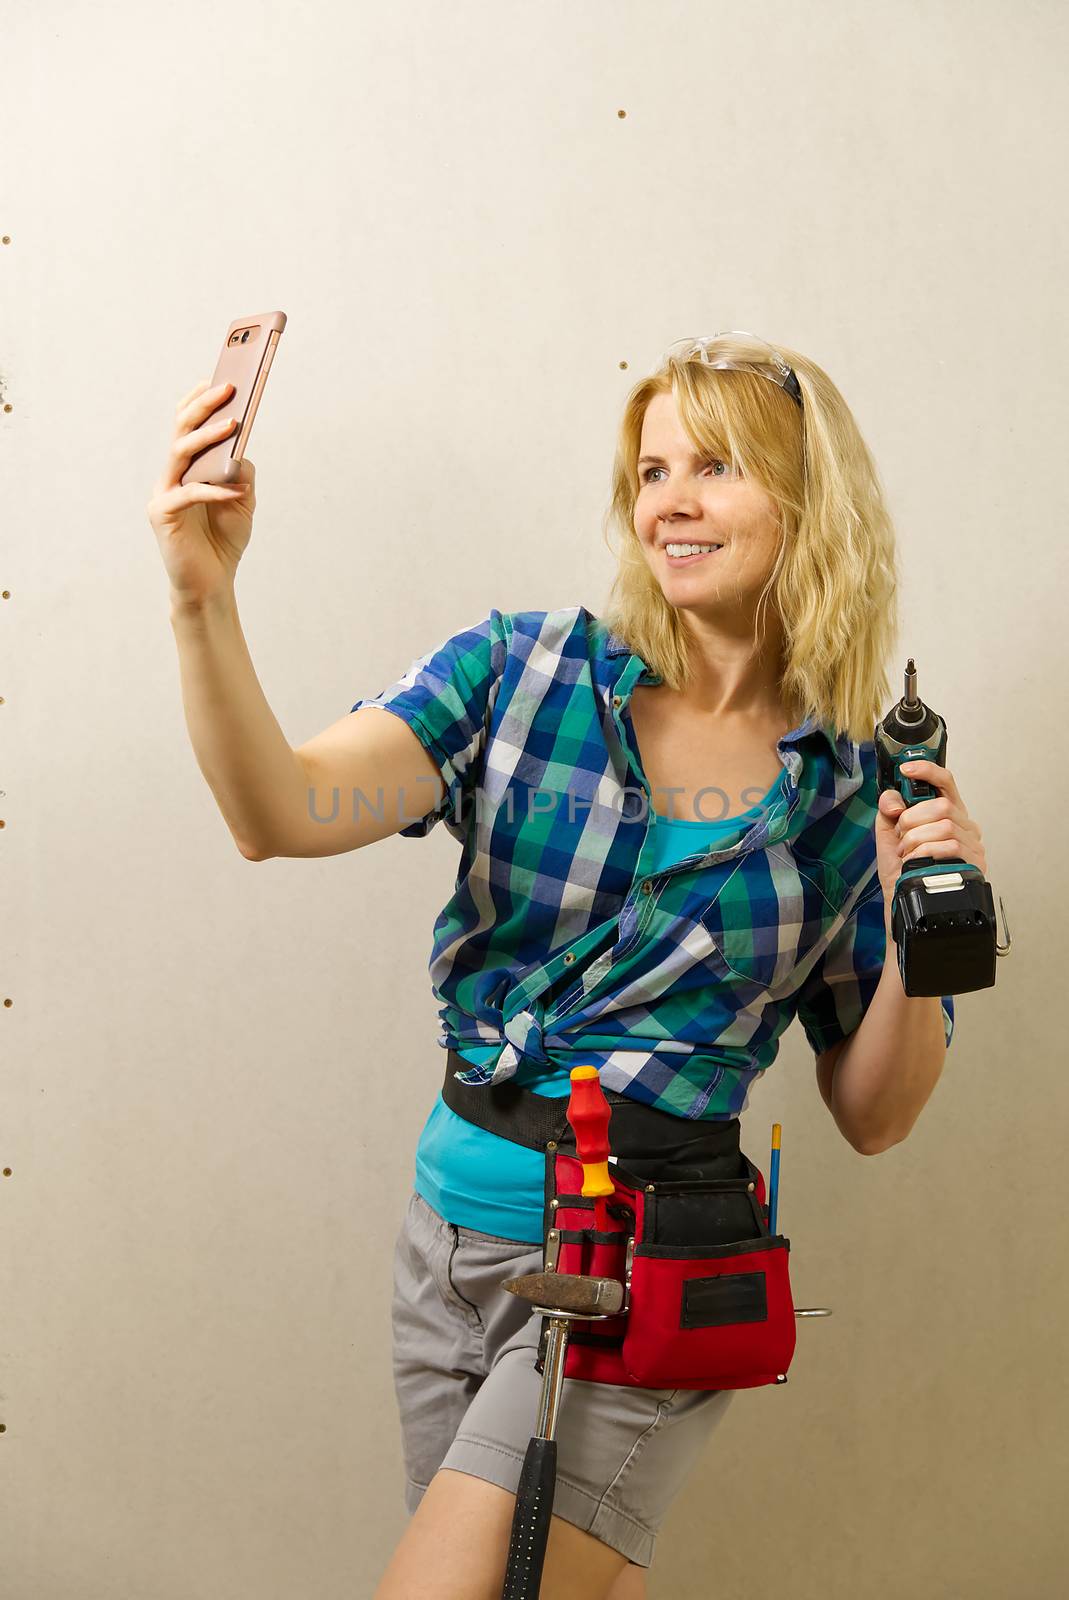 Blond woman wearing a DIY tool belt full of a variety of tools on a unpainted plasterboard wall background. DIY woman concept.